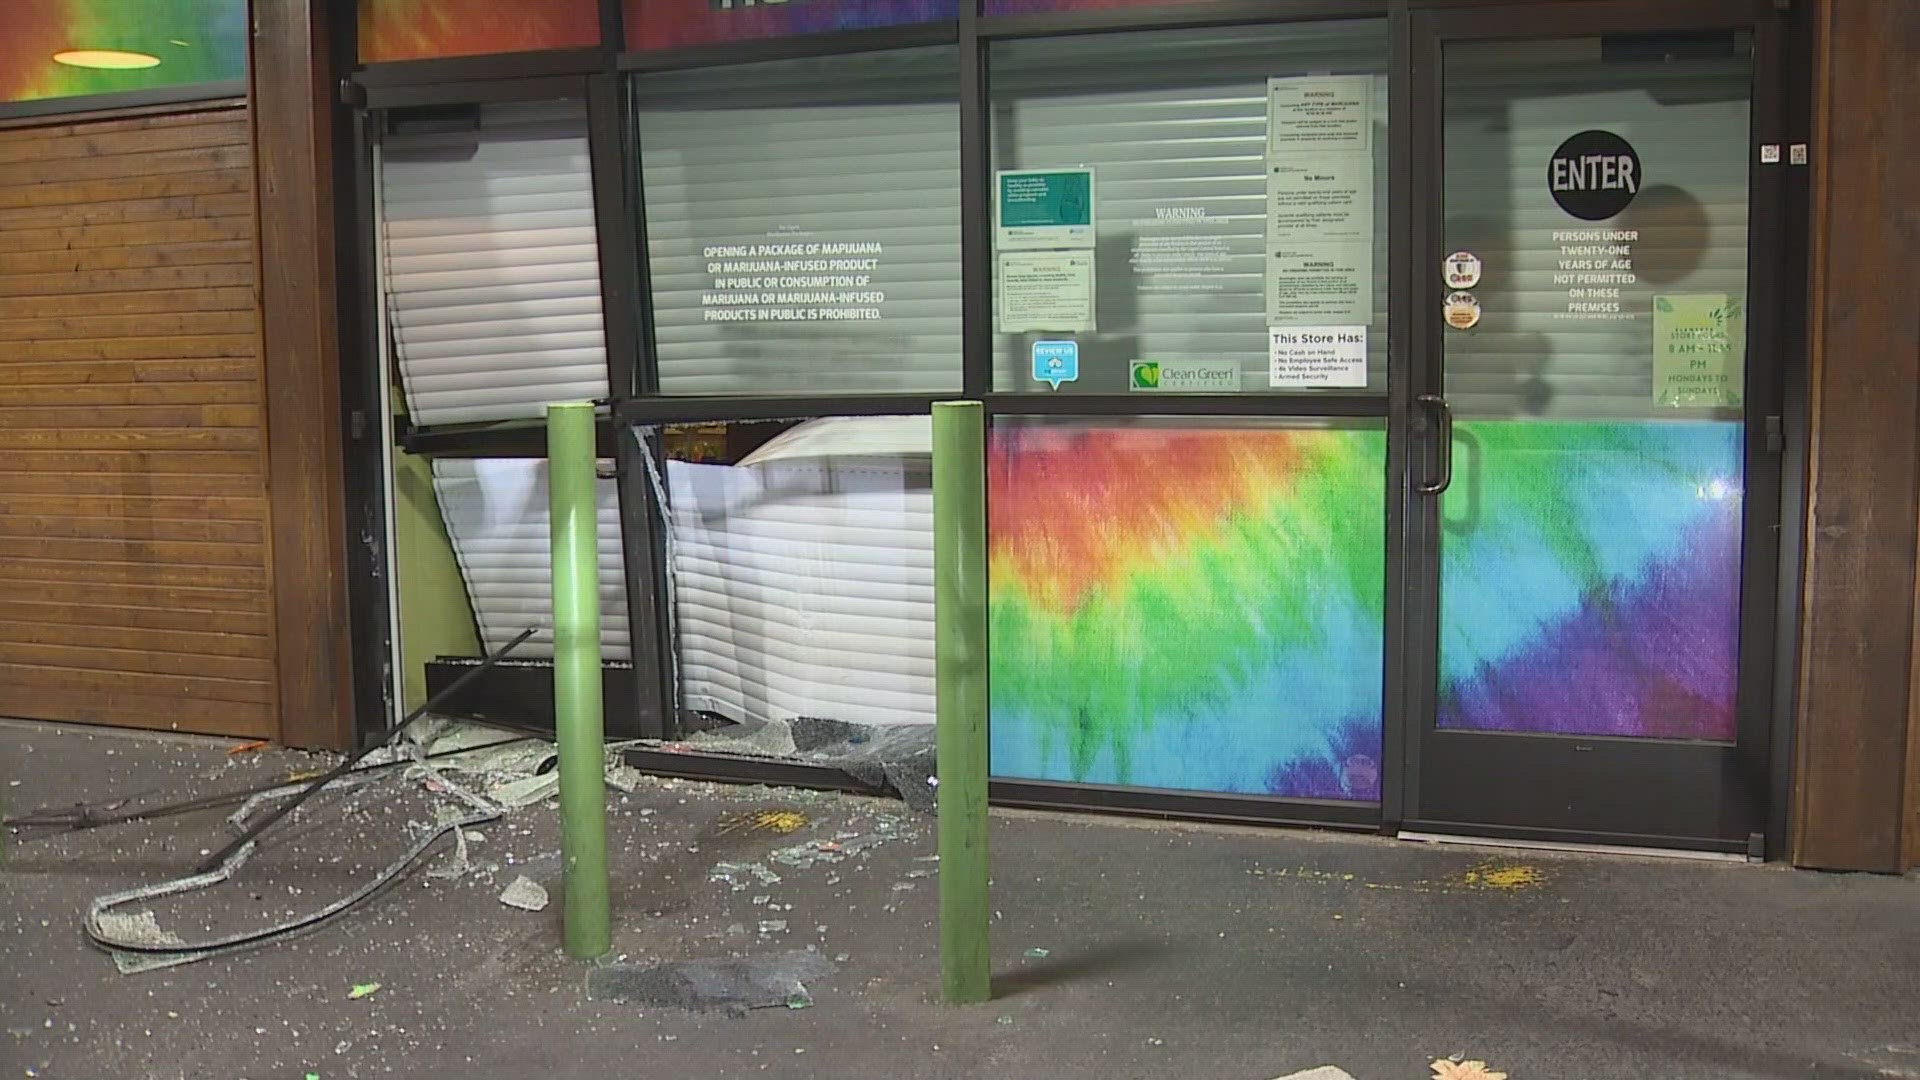 Store owners say the suspects drove into the store multiple times before getting inside.